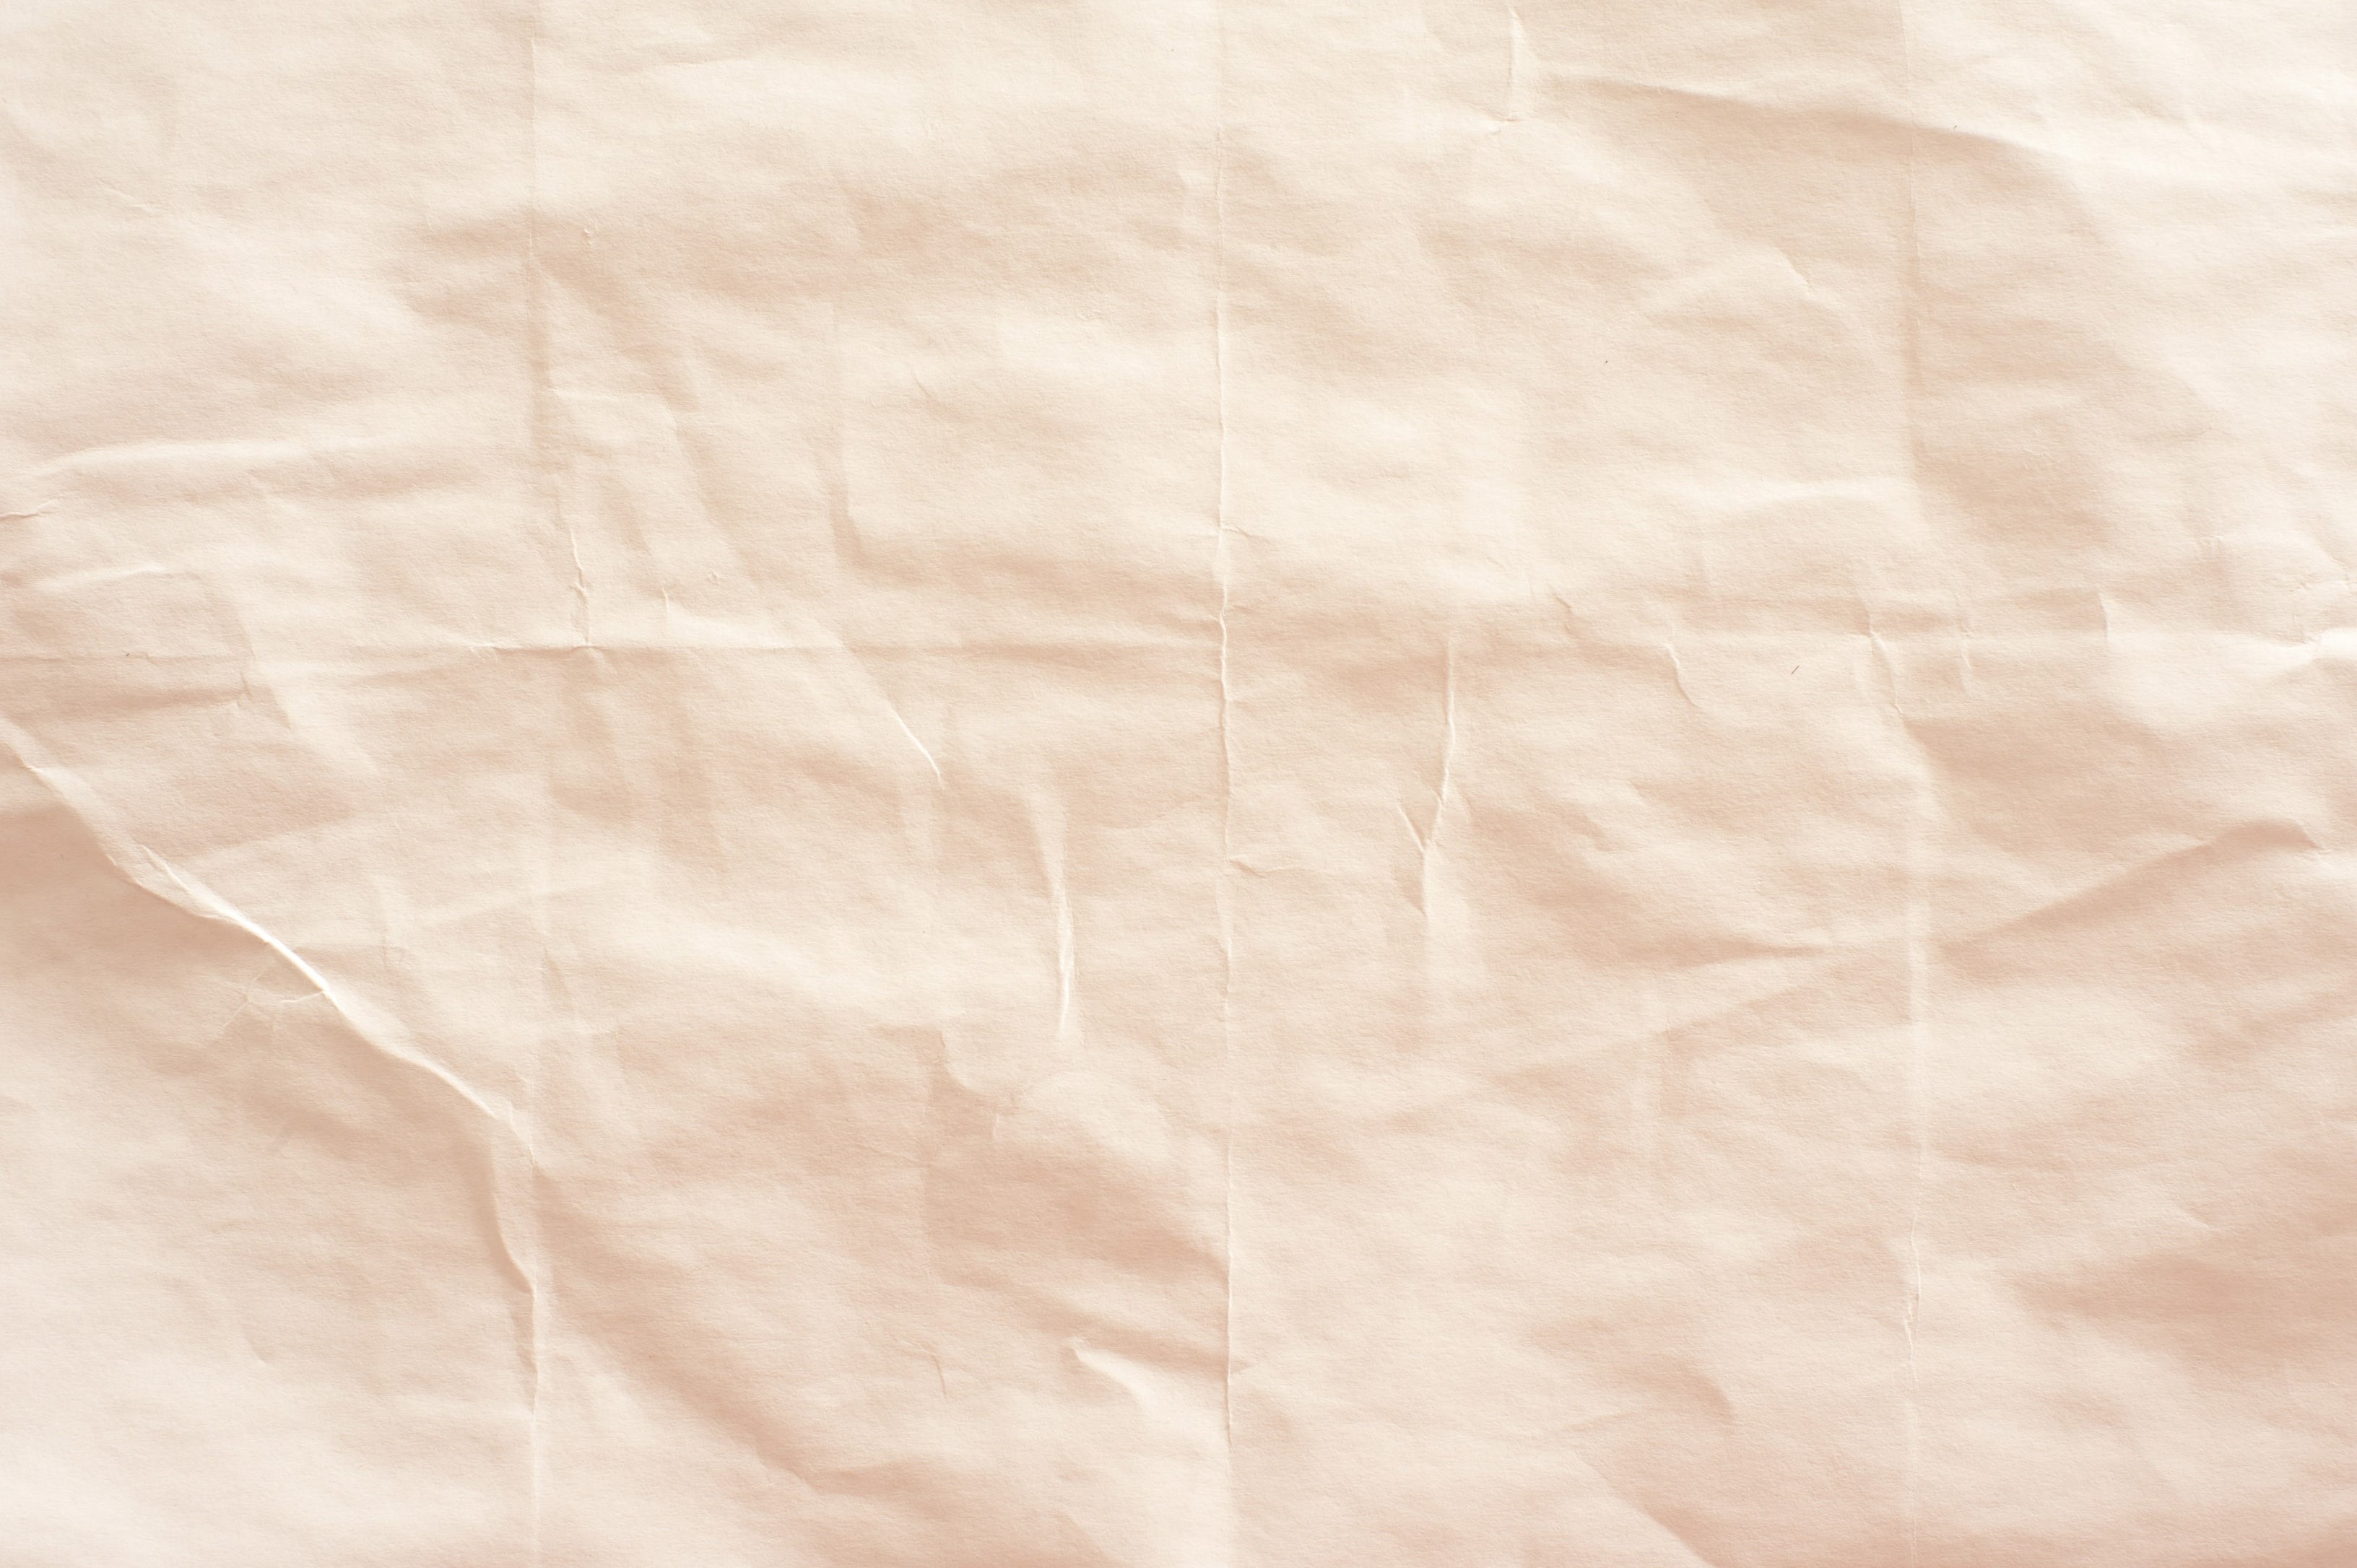 wrinkled paper. Free background and textures